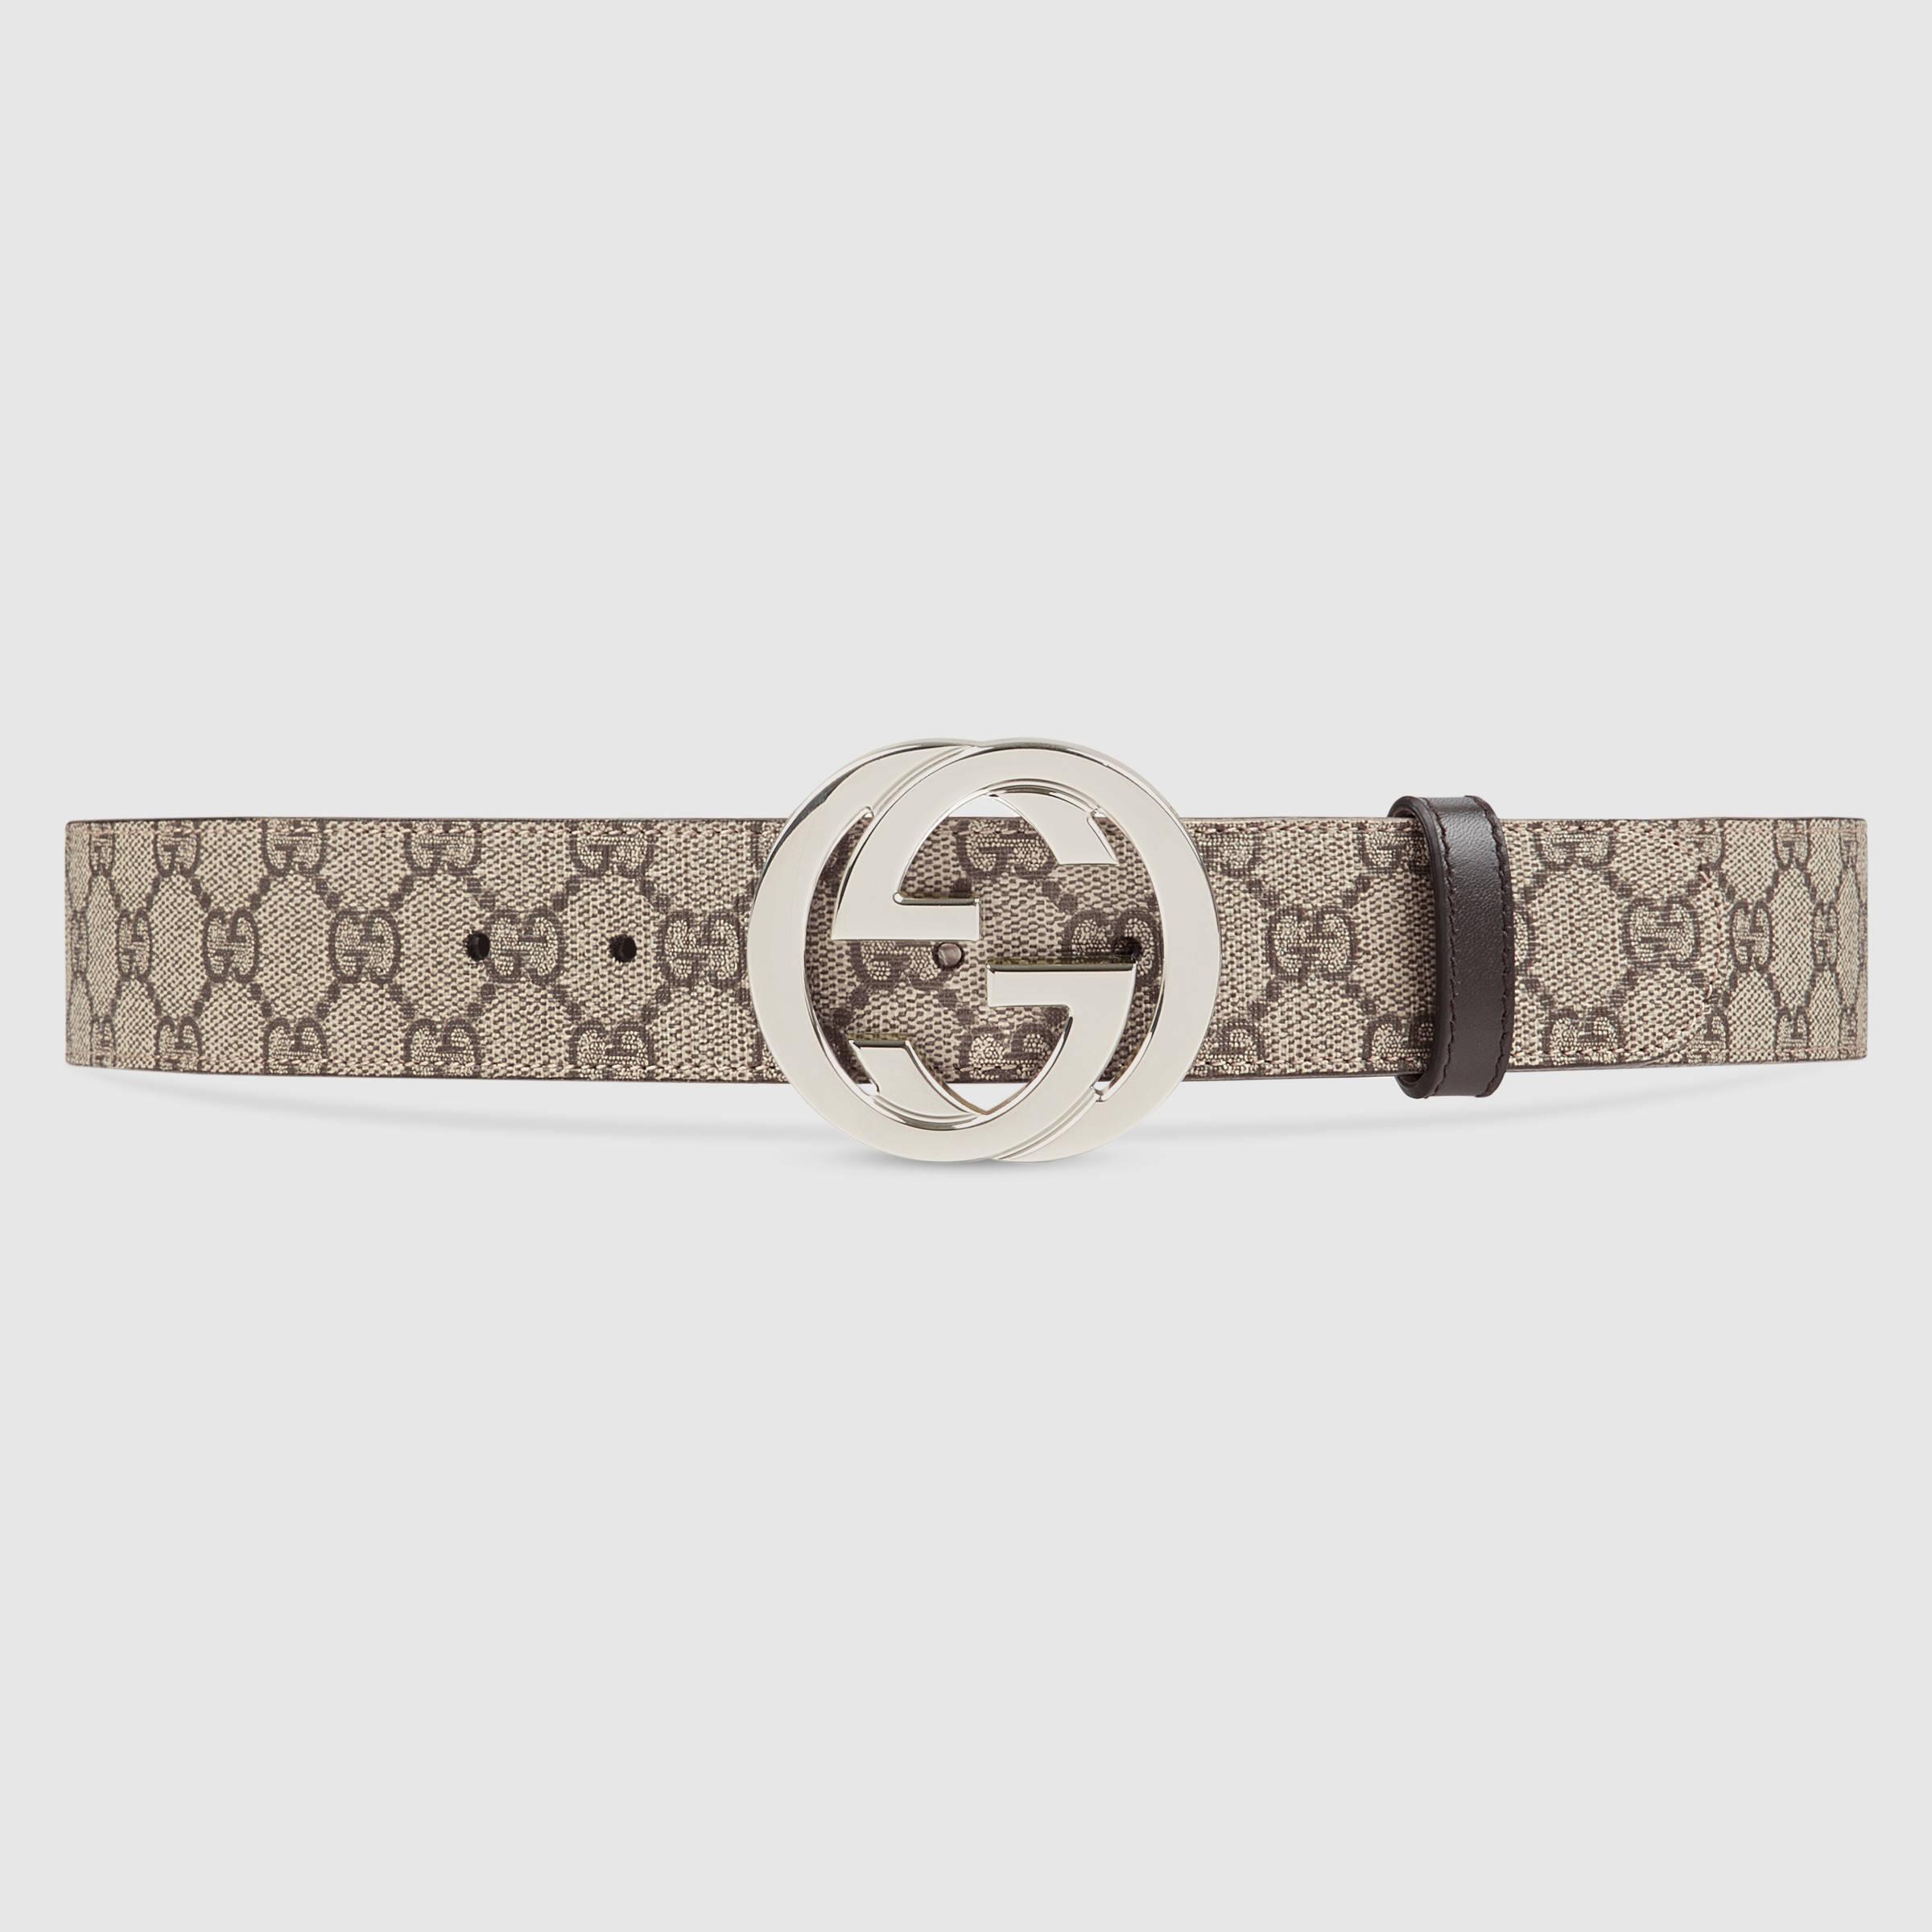 Lyst - Gucci Gg Supreme Belt With G Buckle in Natural for Men